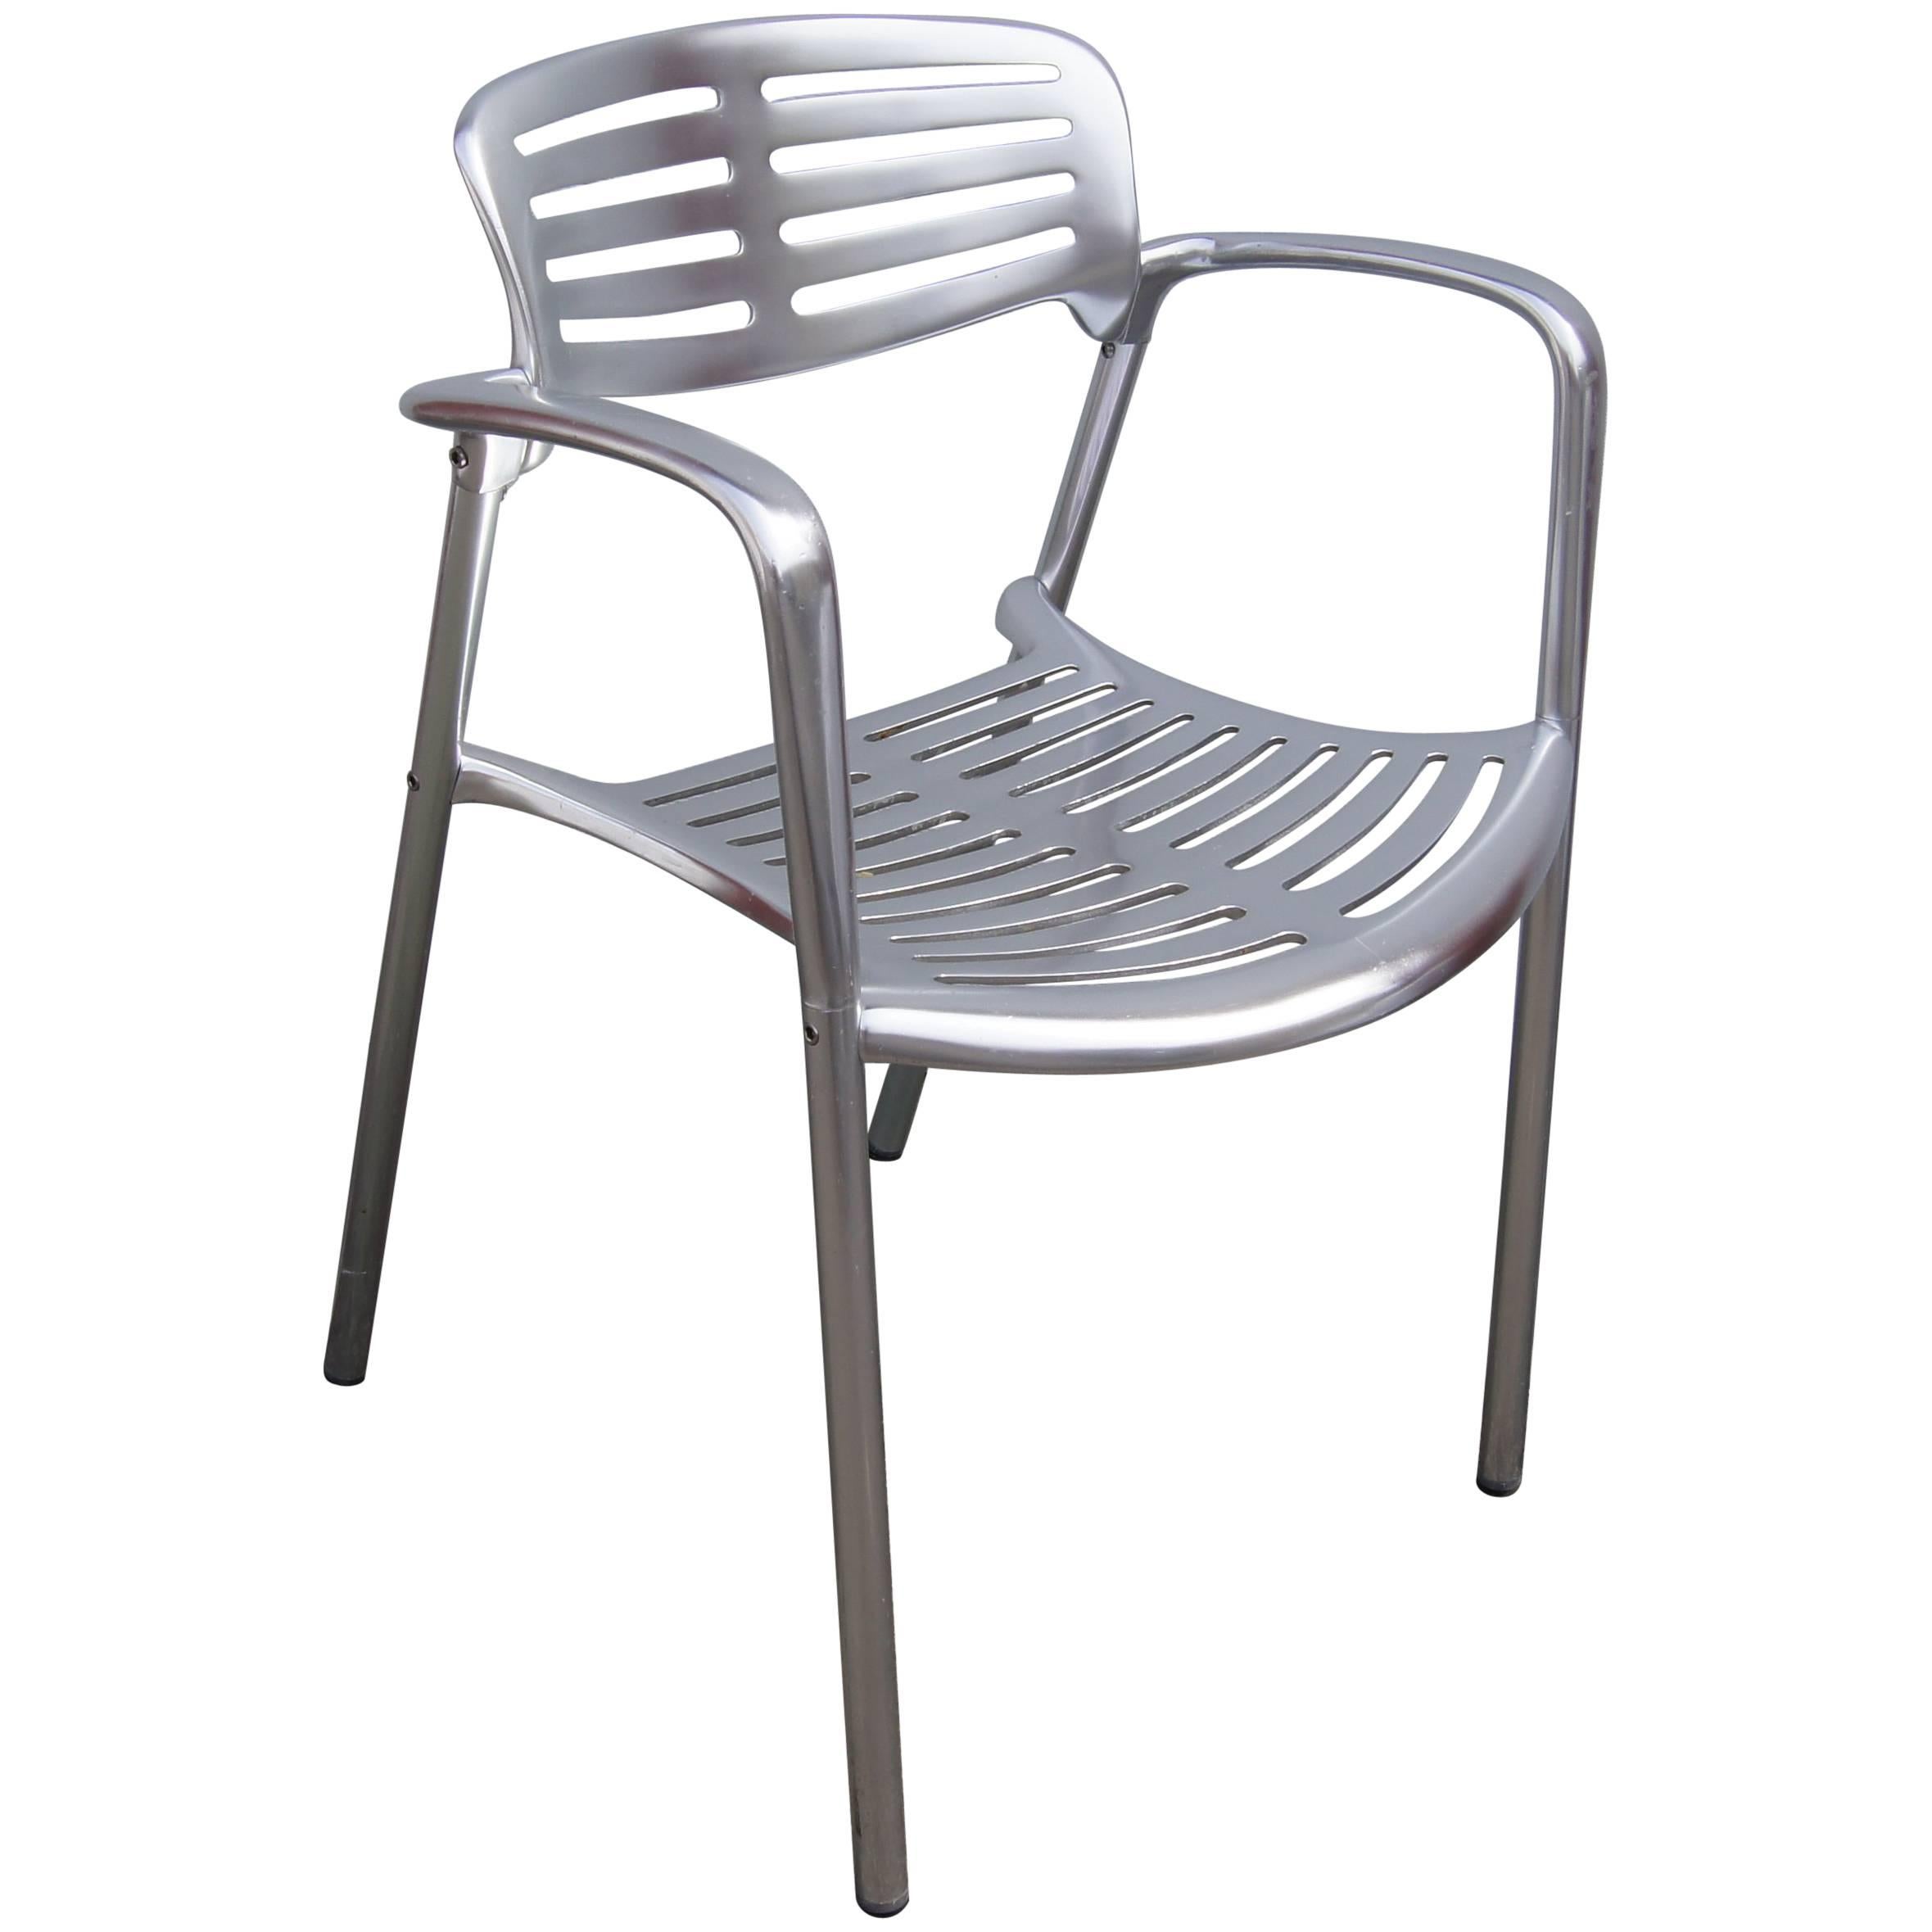 Aluminium Outdoor Toledo Chair by Jorge Pensi for Knoll